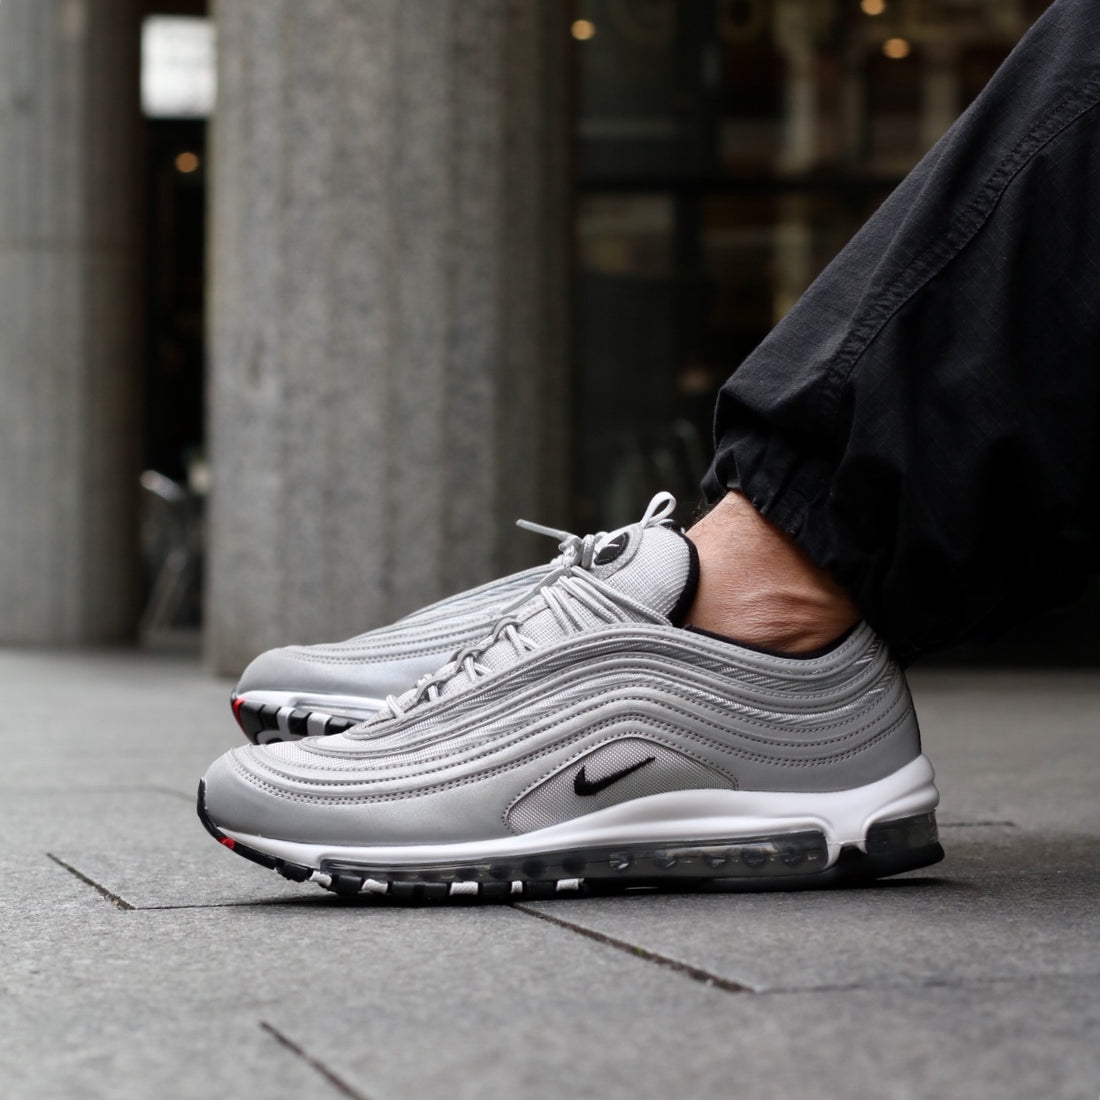 NEW RELEASE: Air Max 97 "Reflect Silver"